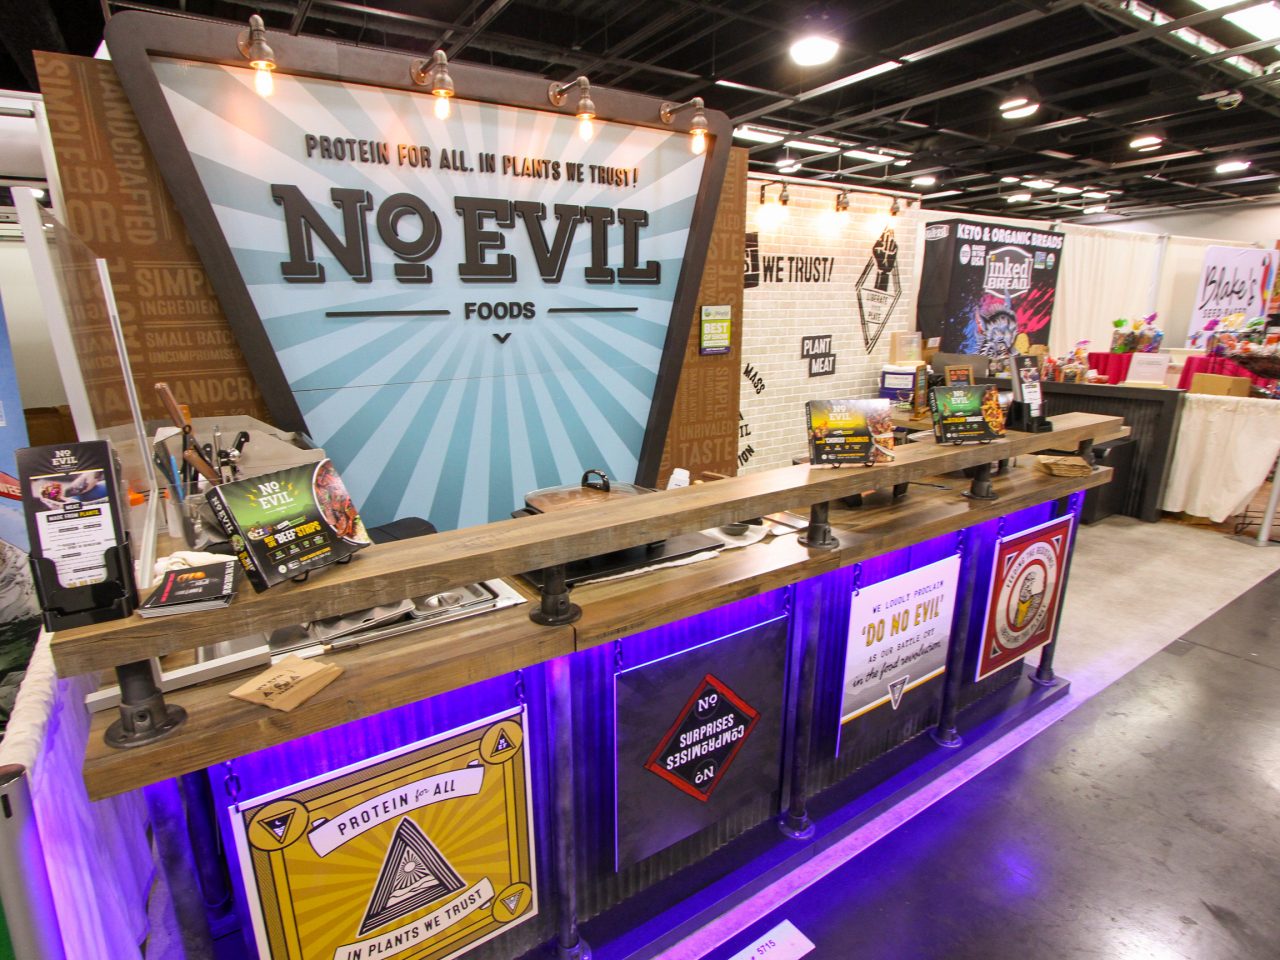 Left Front View of No Evil Exhibit at Natural Products Expo West